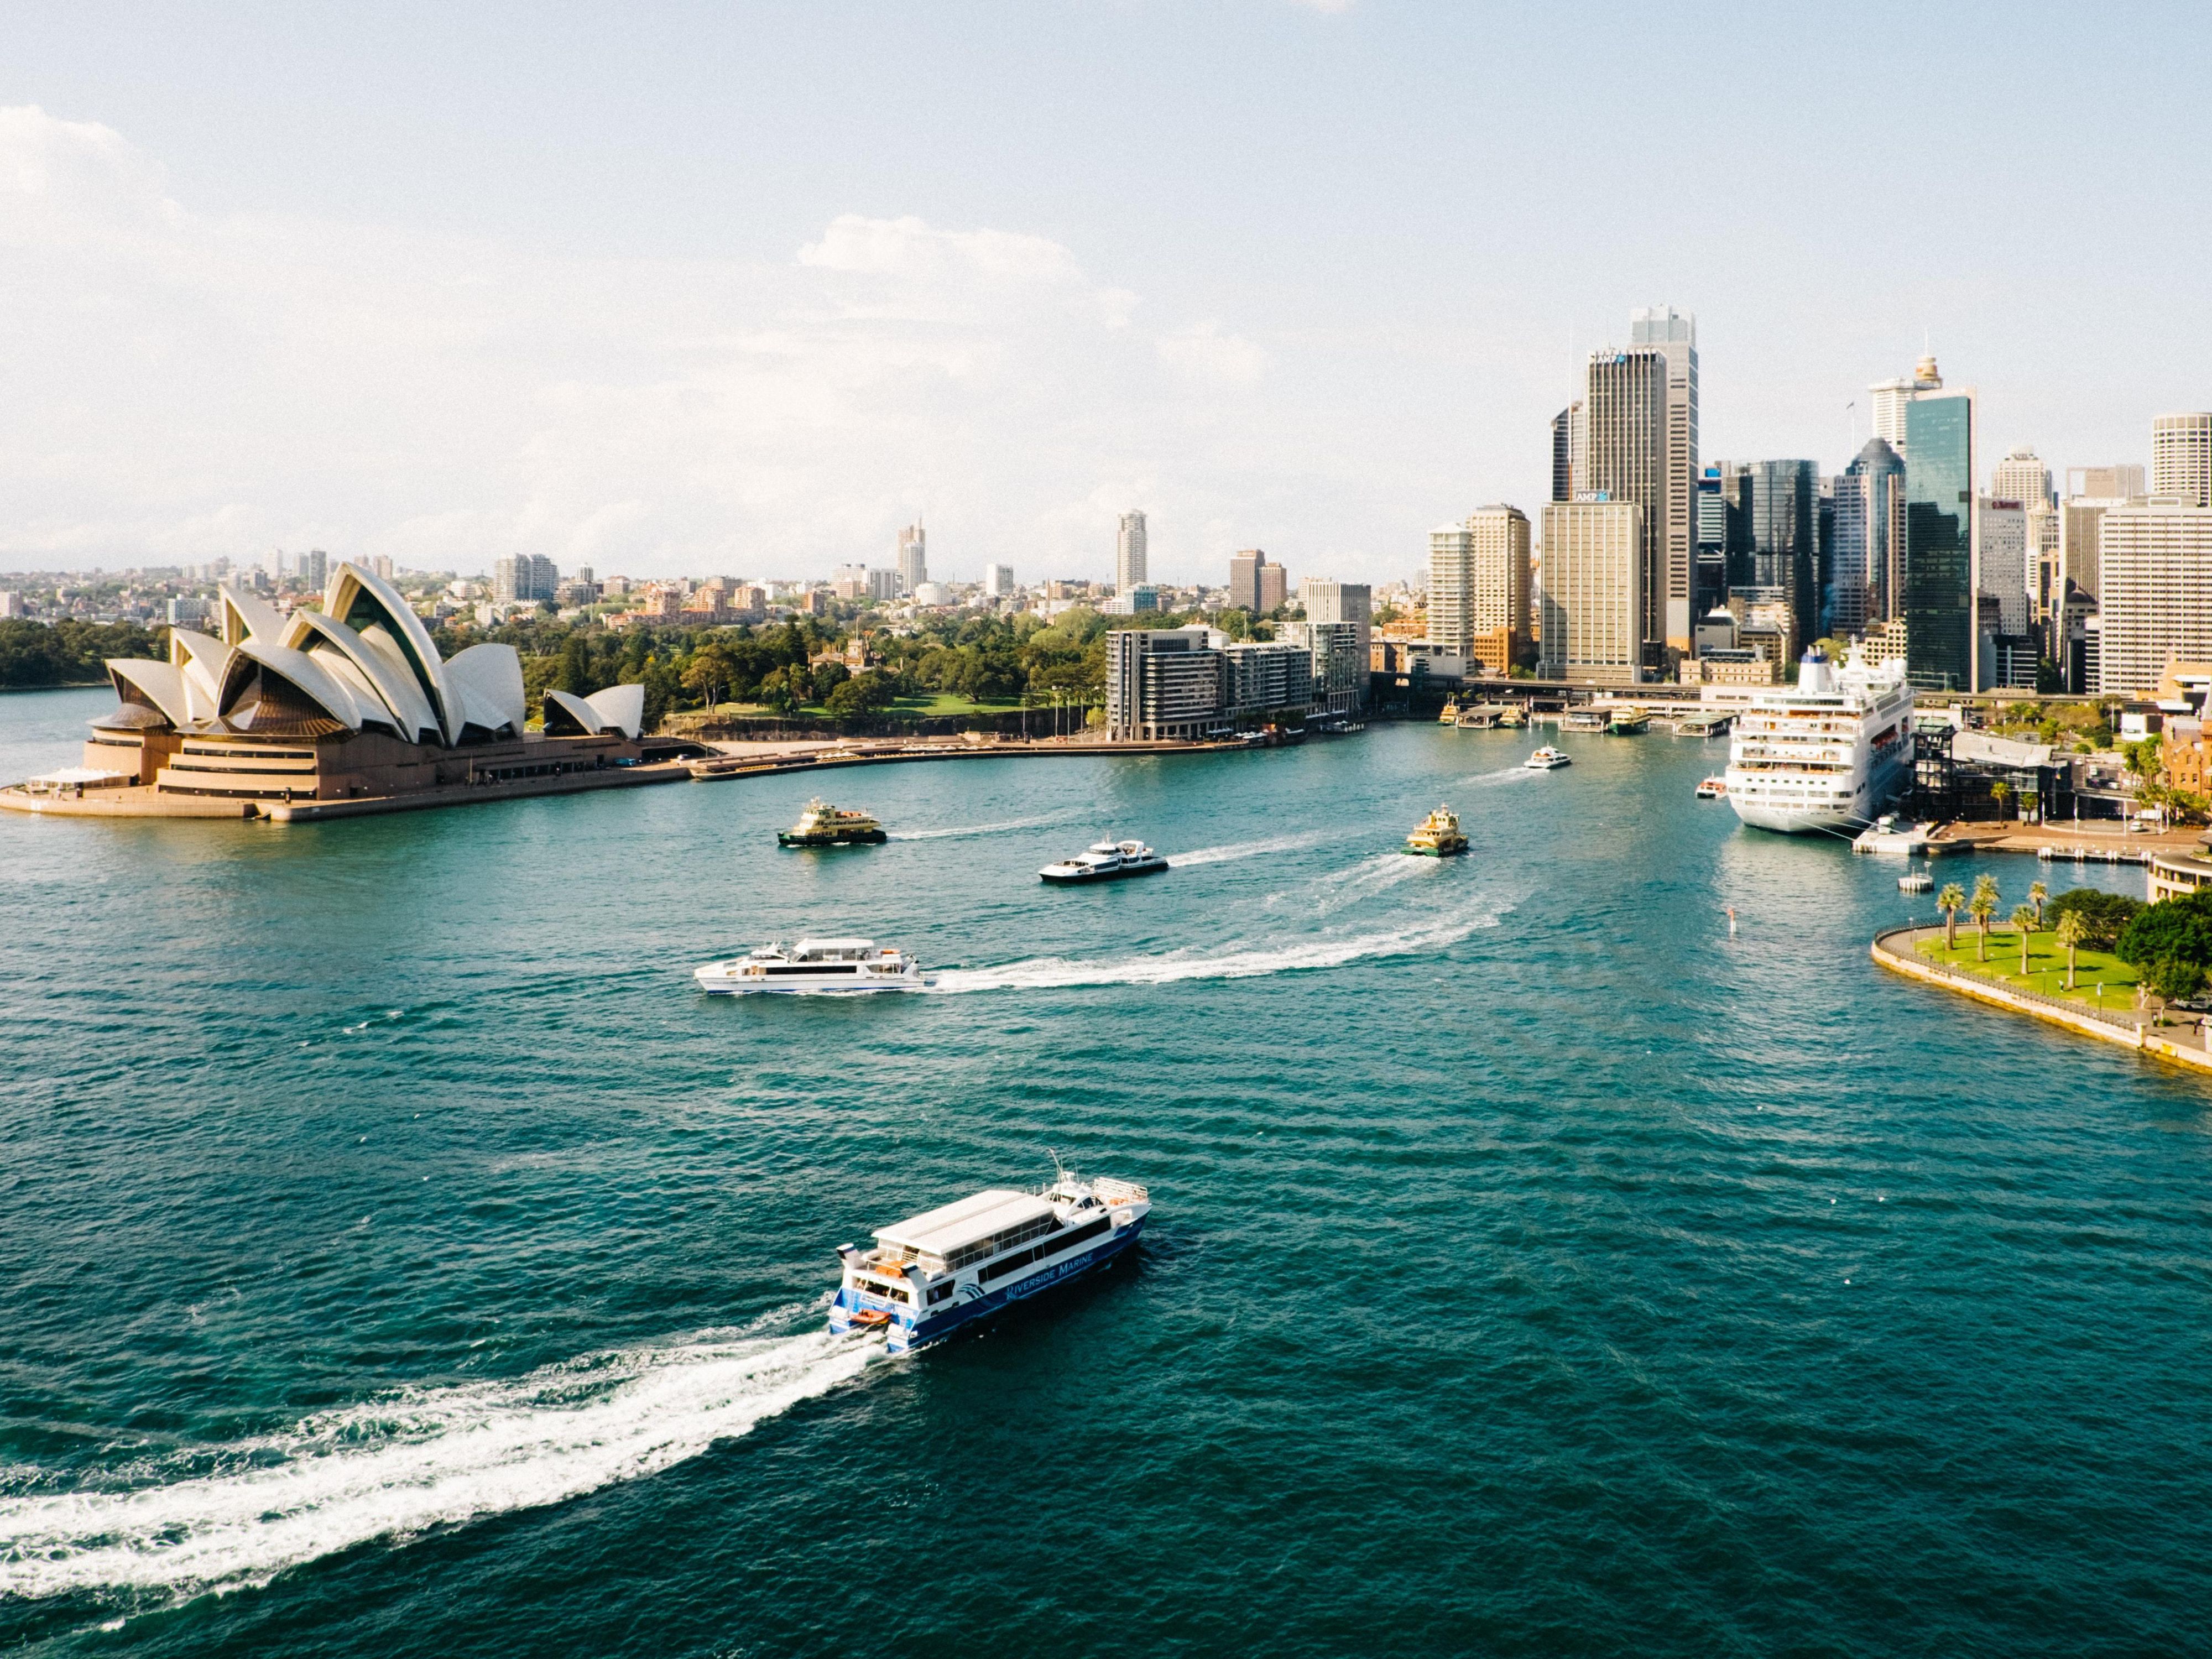 Hop on a train from Mascot Station and reach Central Station for CBD access, including shopping and entertainment in only 7 minutes. Depart at Circular Quay to visit iconic Australian sites such as the Sydney Opera House, Sydney Harbour Bridge and the Botanic Gardens. 